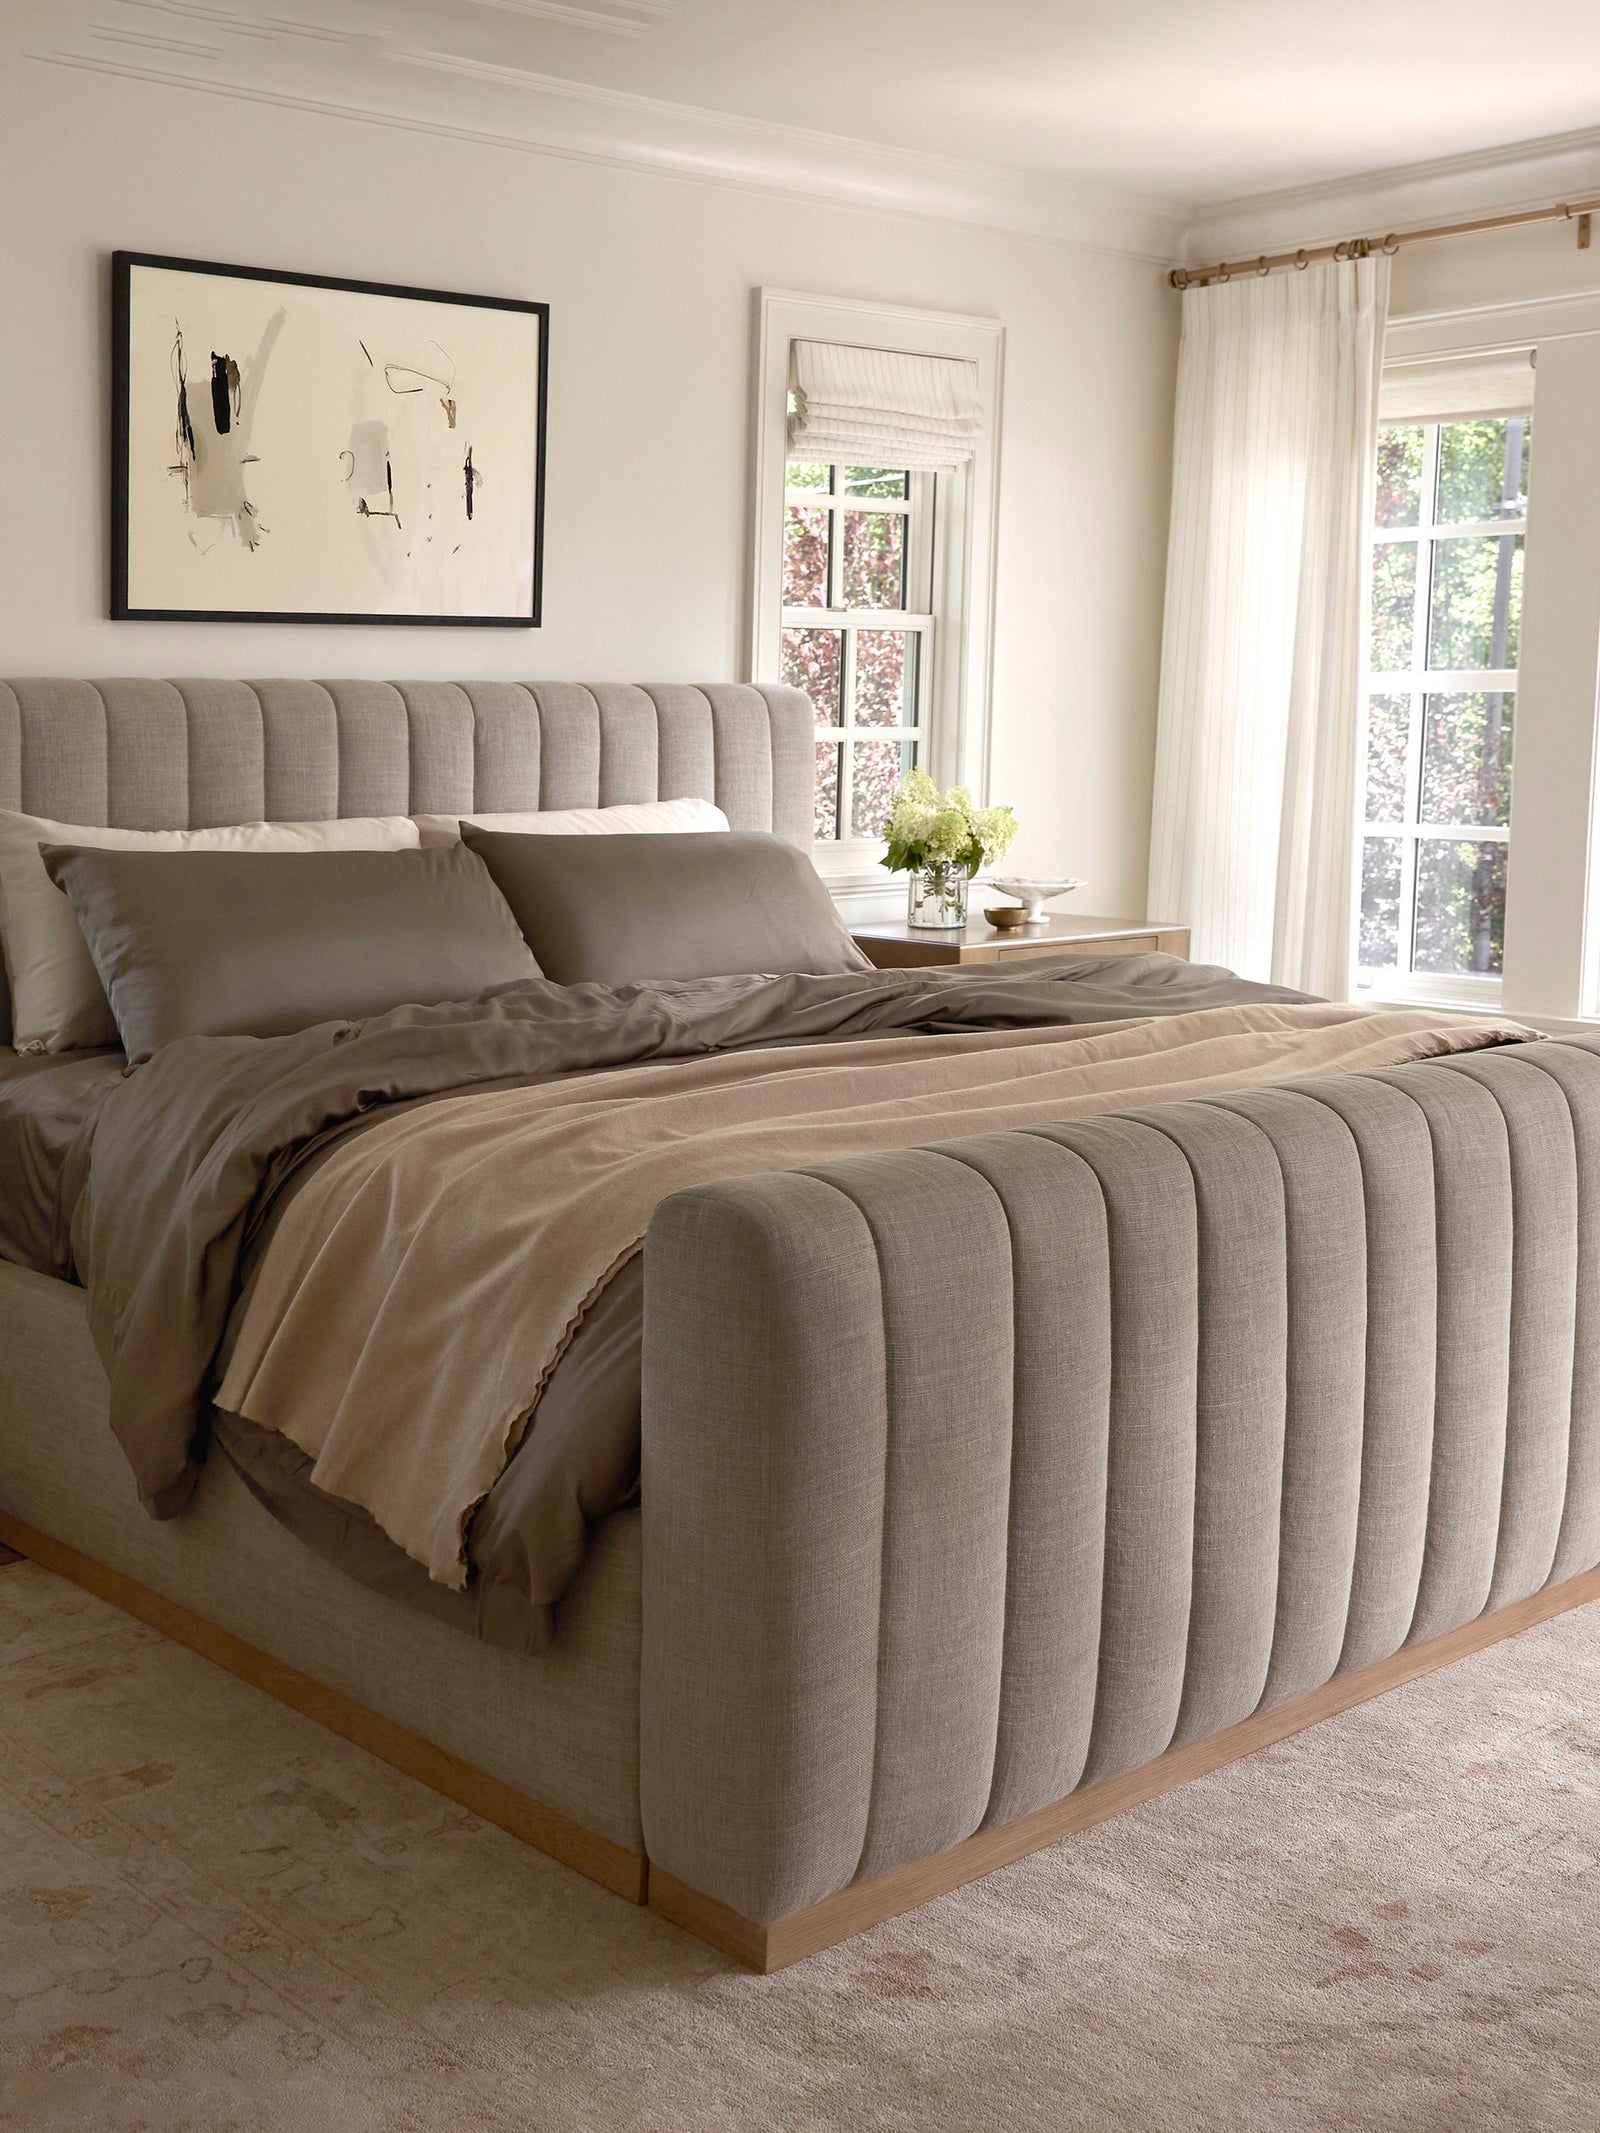 Bed with walnut bedding and a cashmere blanket draped across 